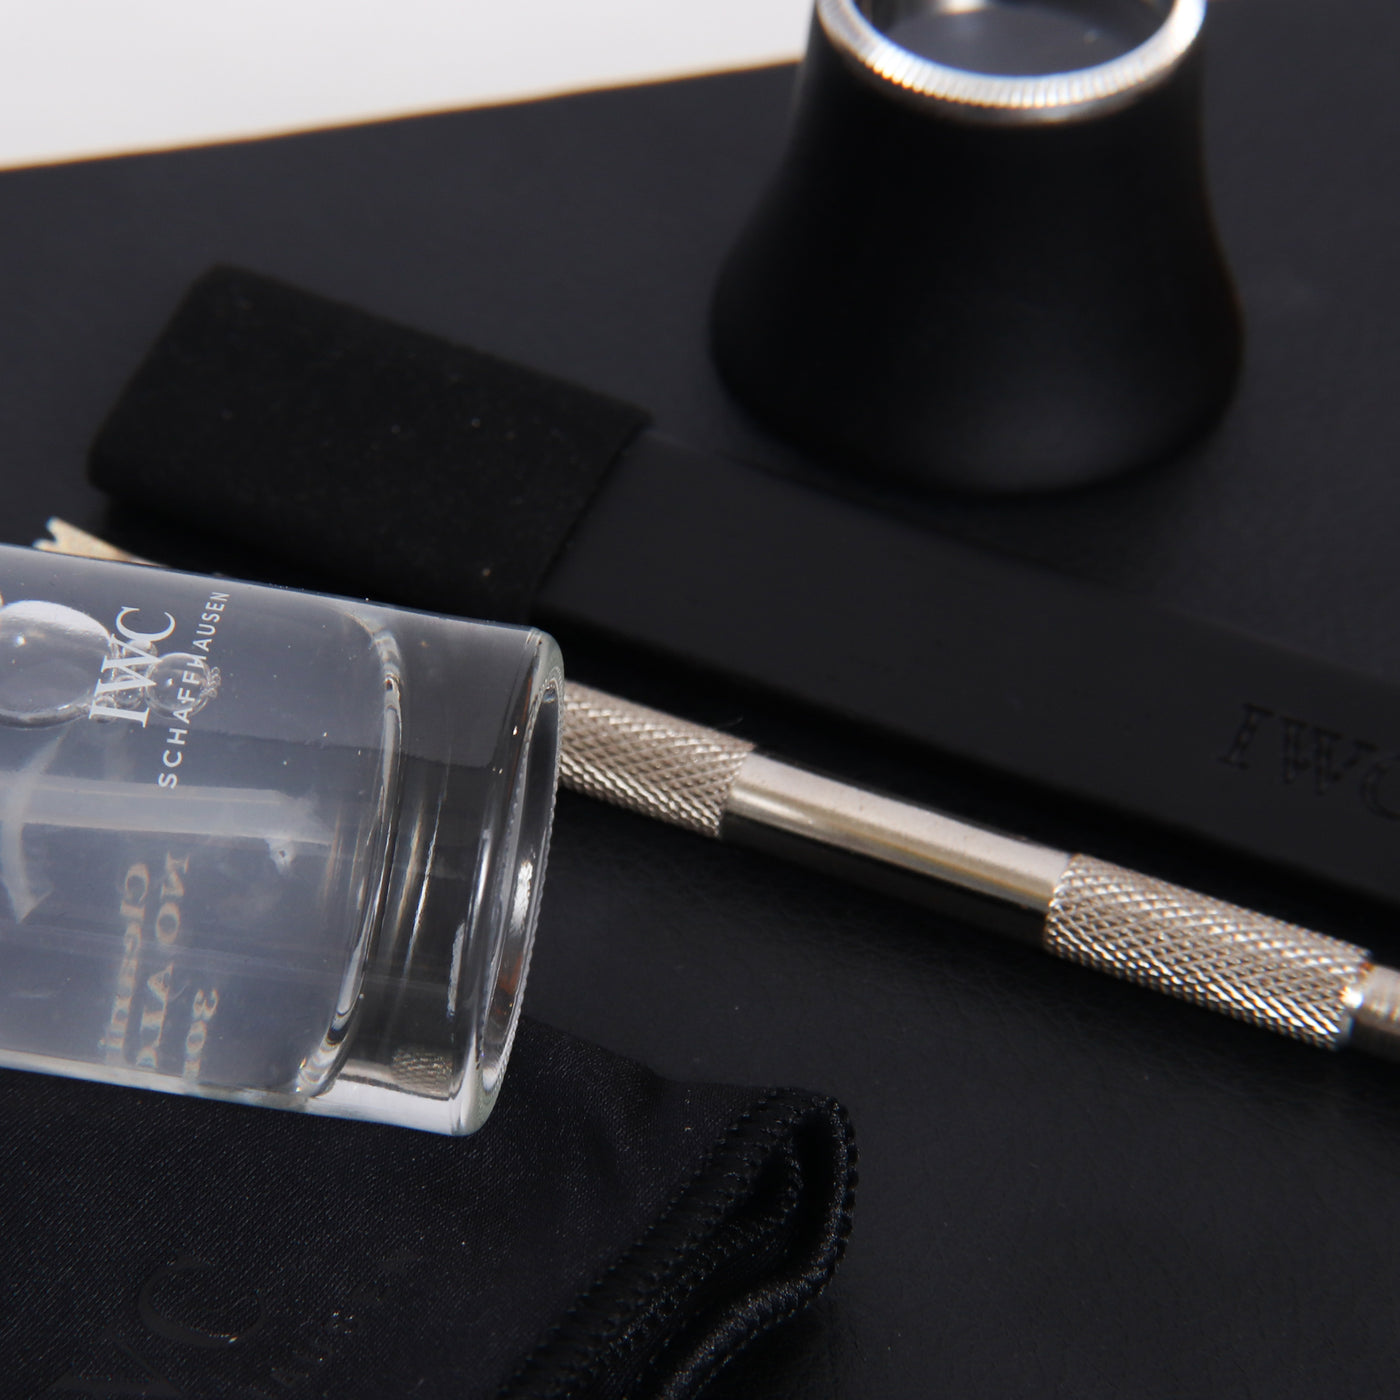 IWC Watch Tool & Cleaning Kit Items